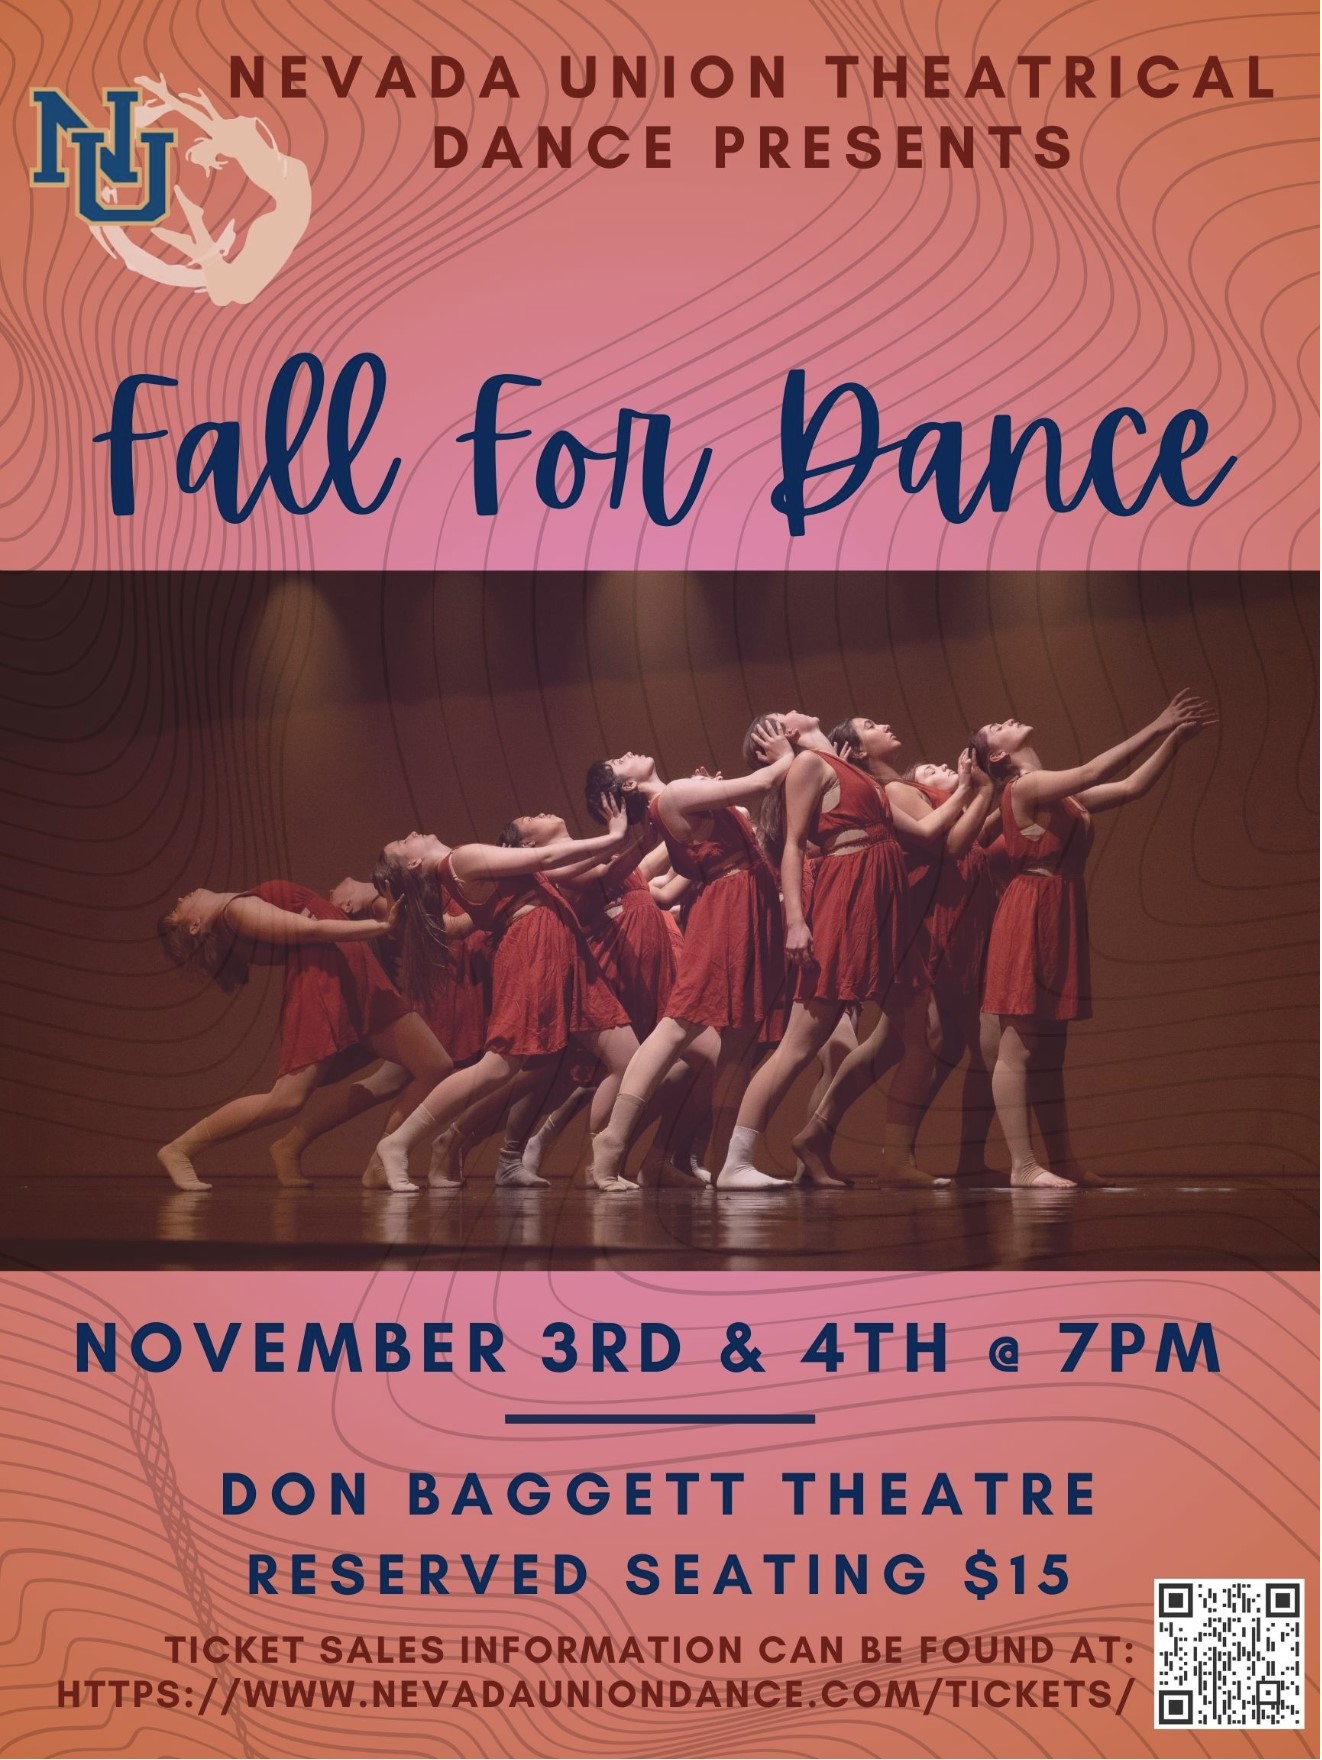 Fall for Dance Performance Flyer 11/3 & 4